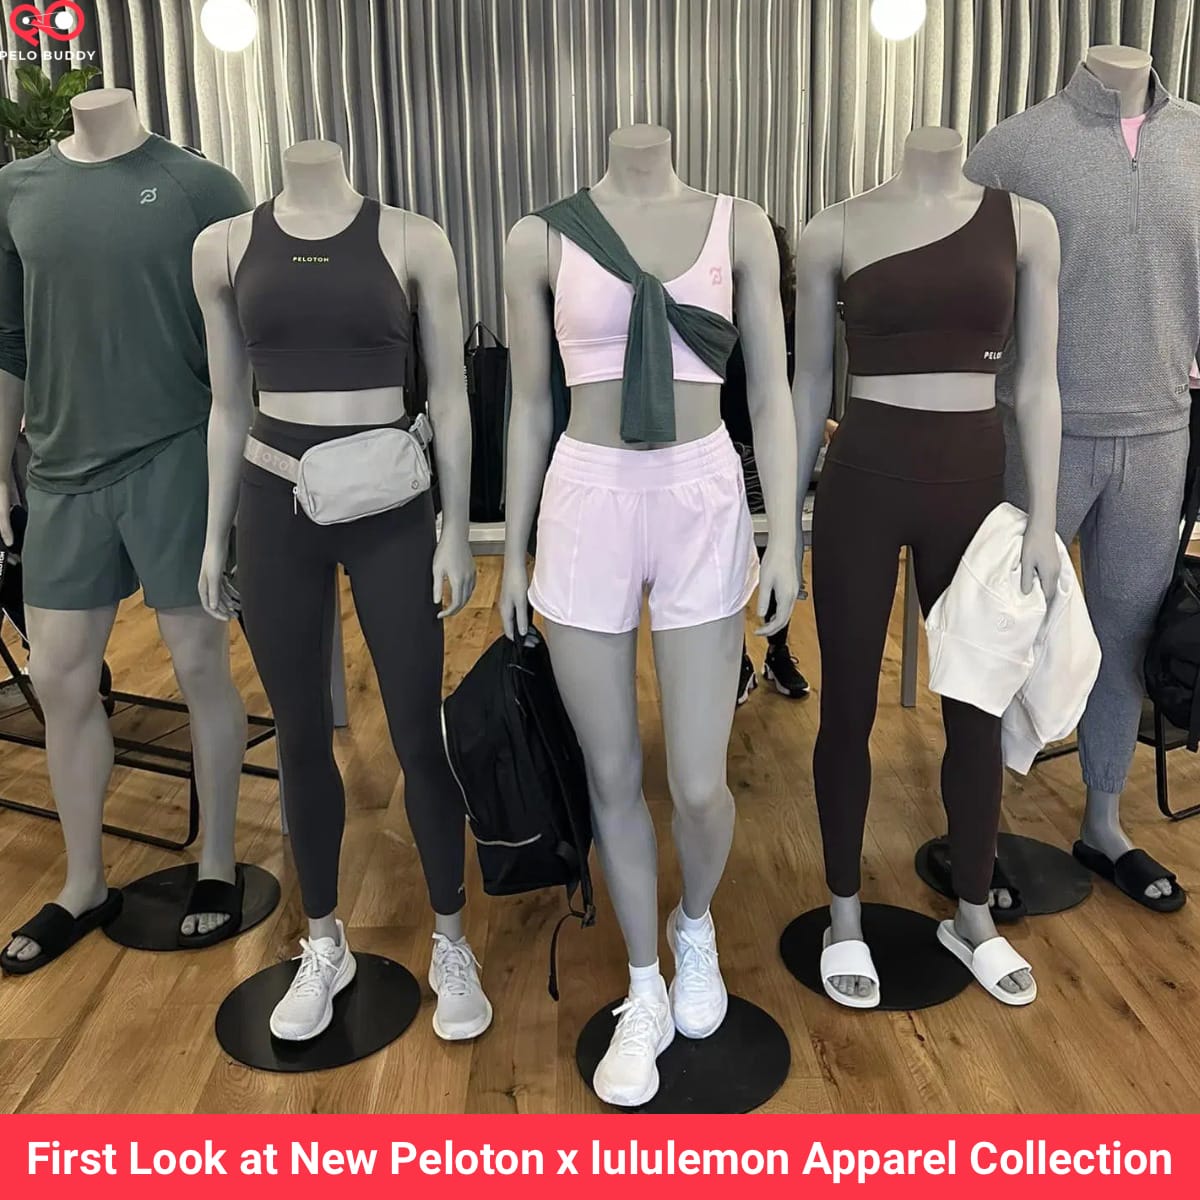 First Look at New Peloton x lululemon Apparel Collection - Peloton